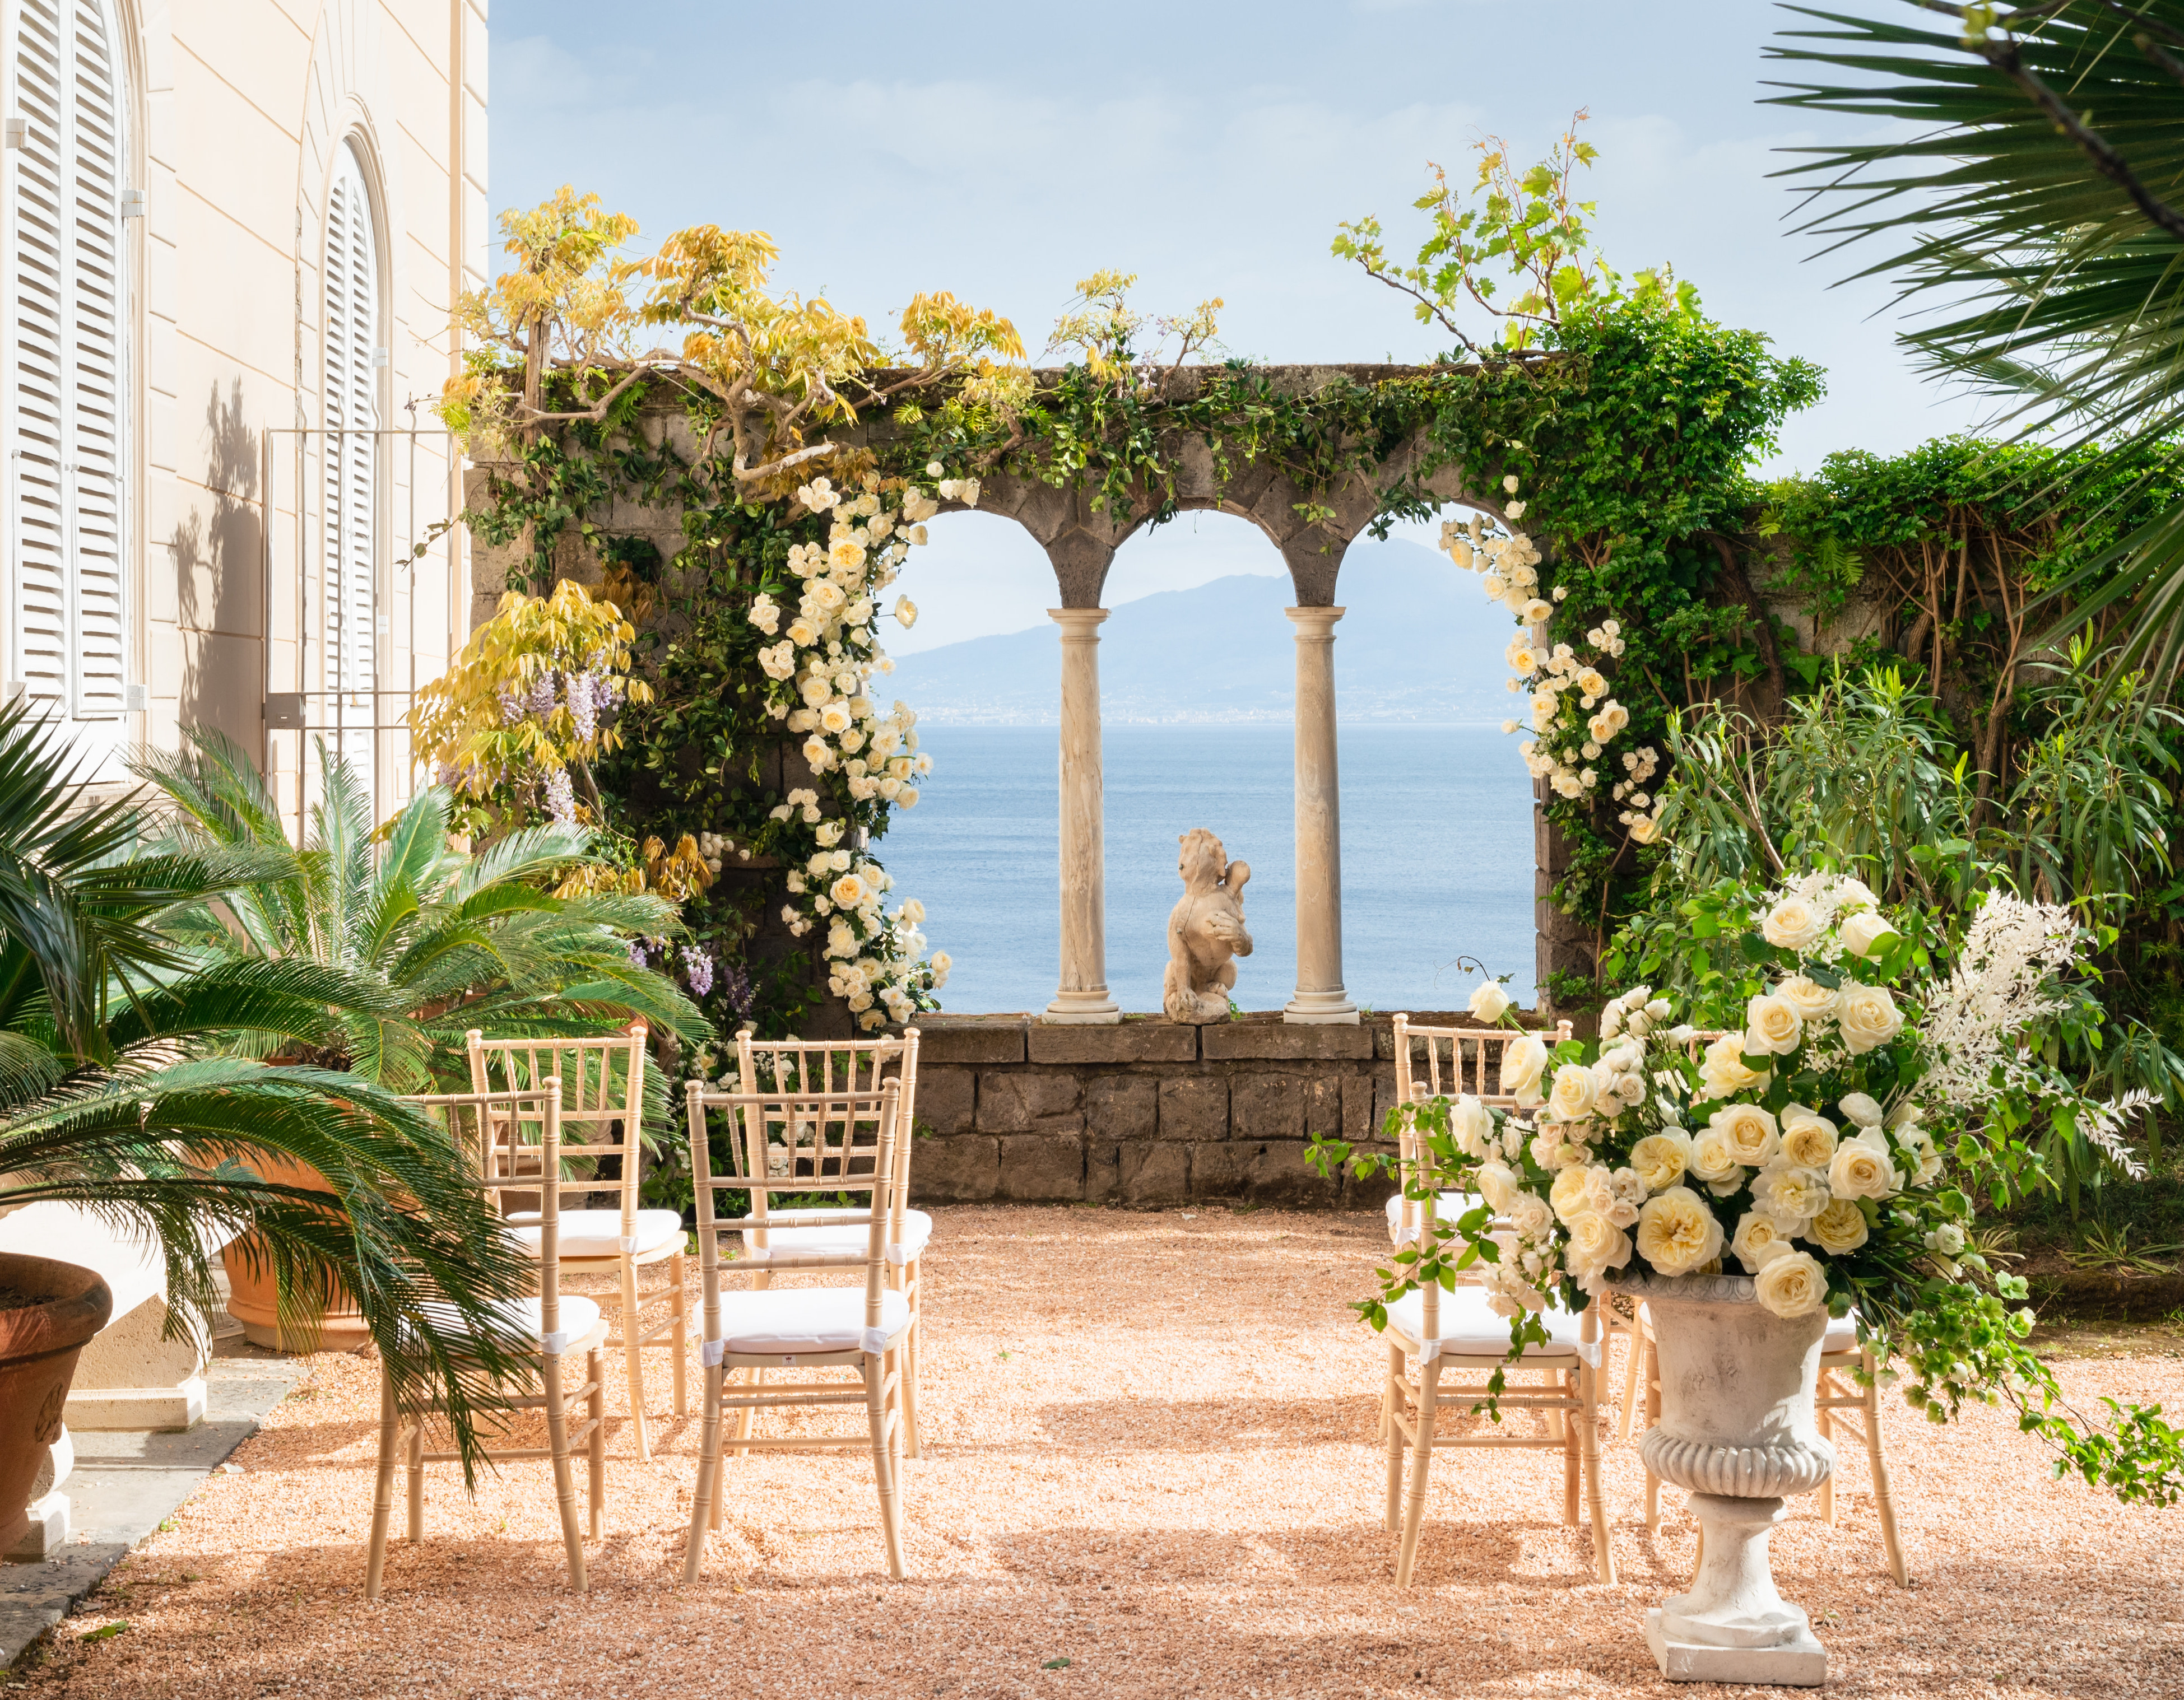 An intimate wedding ceremony is set up outside with a view of the ocean in Italy.